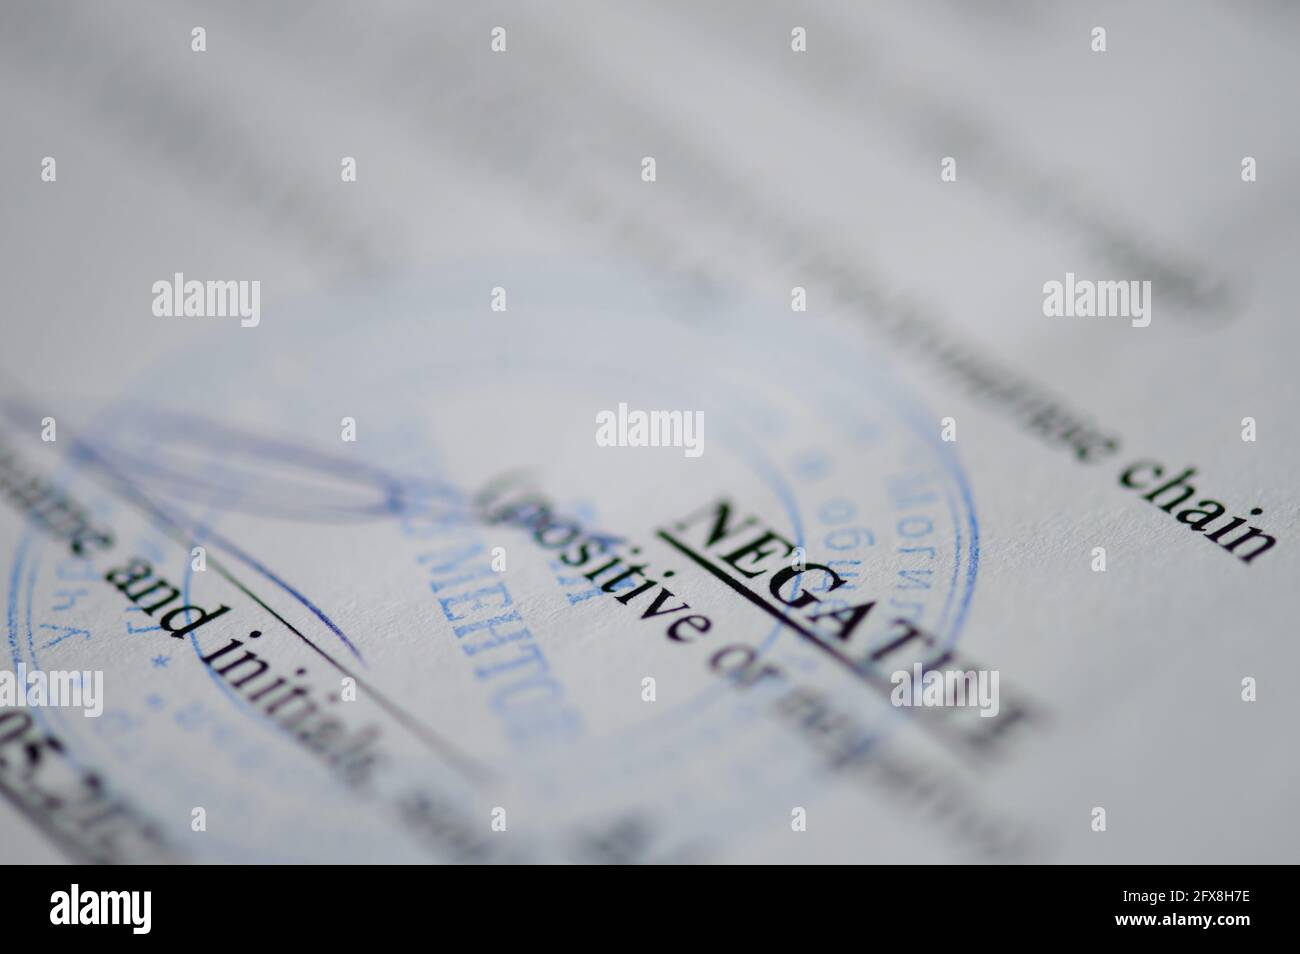 New york, USA - May 26, 2021: Negative covid test result on official document macro close up view Stock Photo